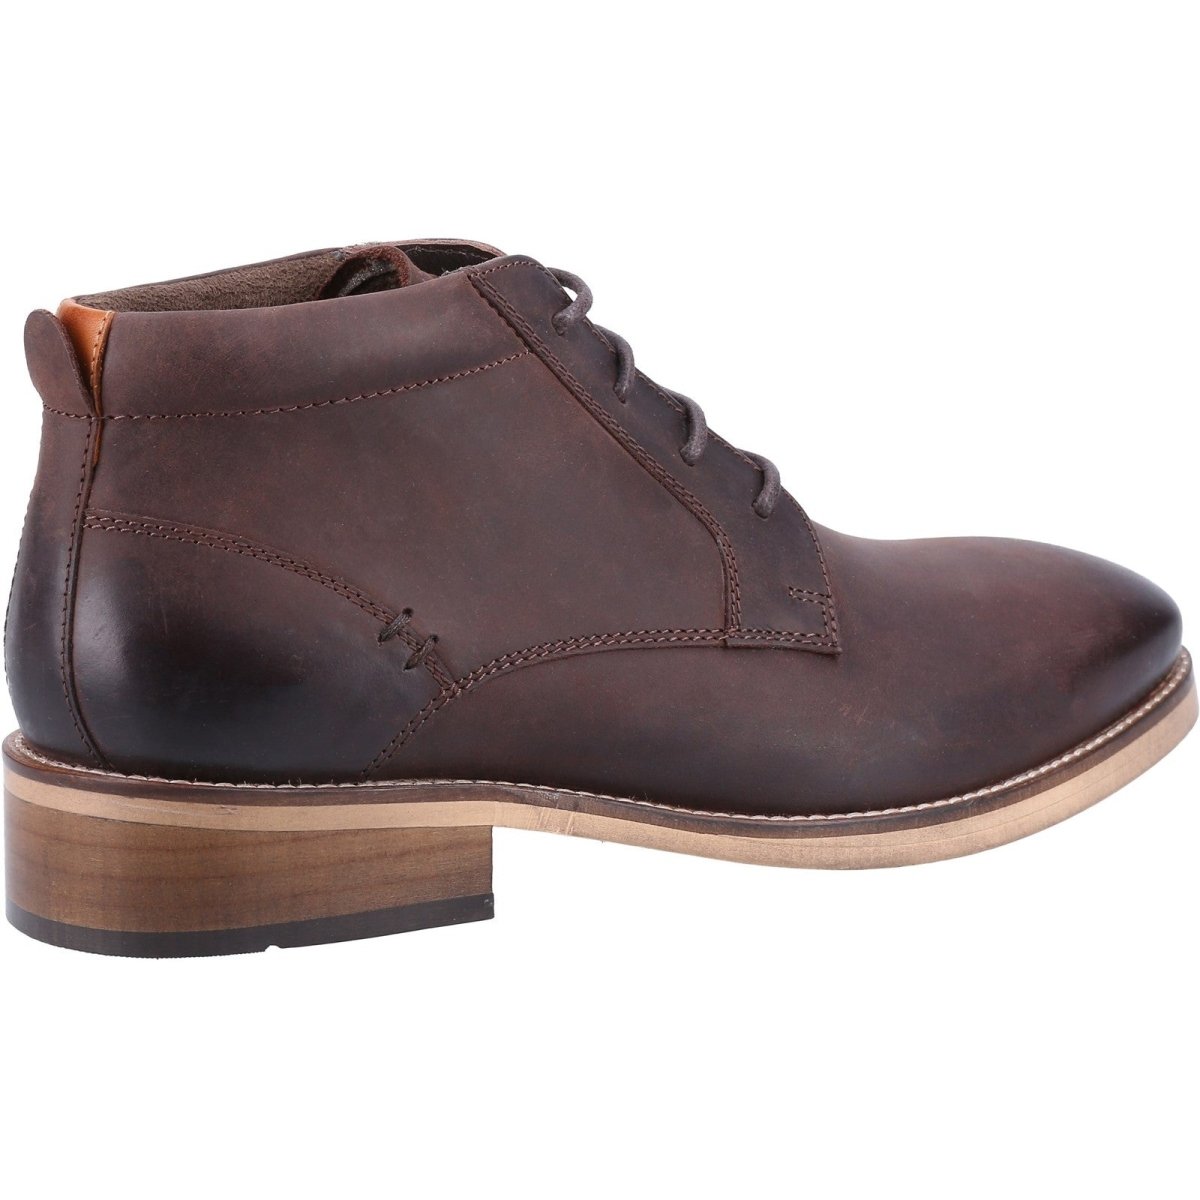 Cotswold Harescombe Boots - Shoe Store Direct